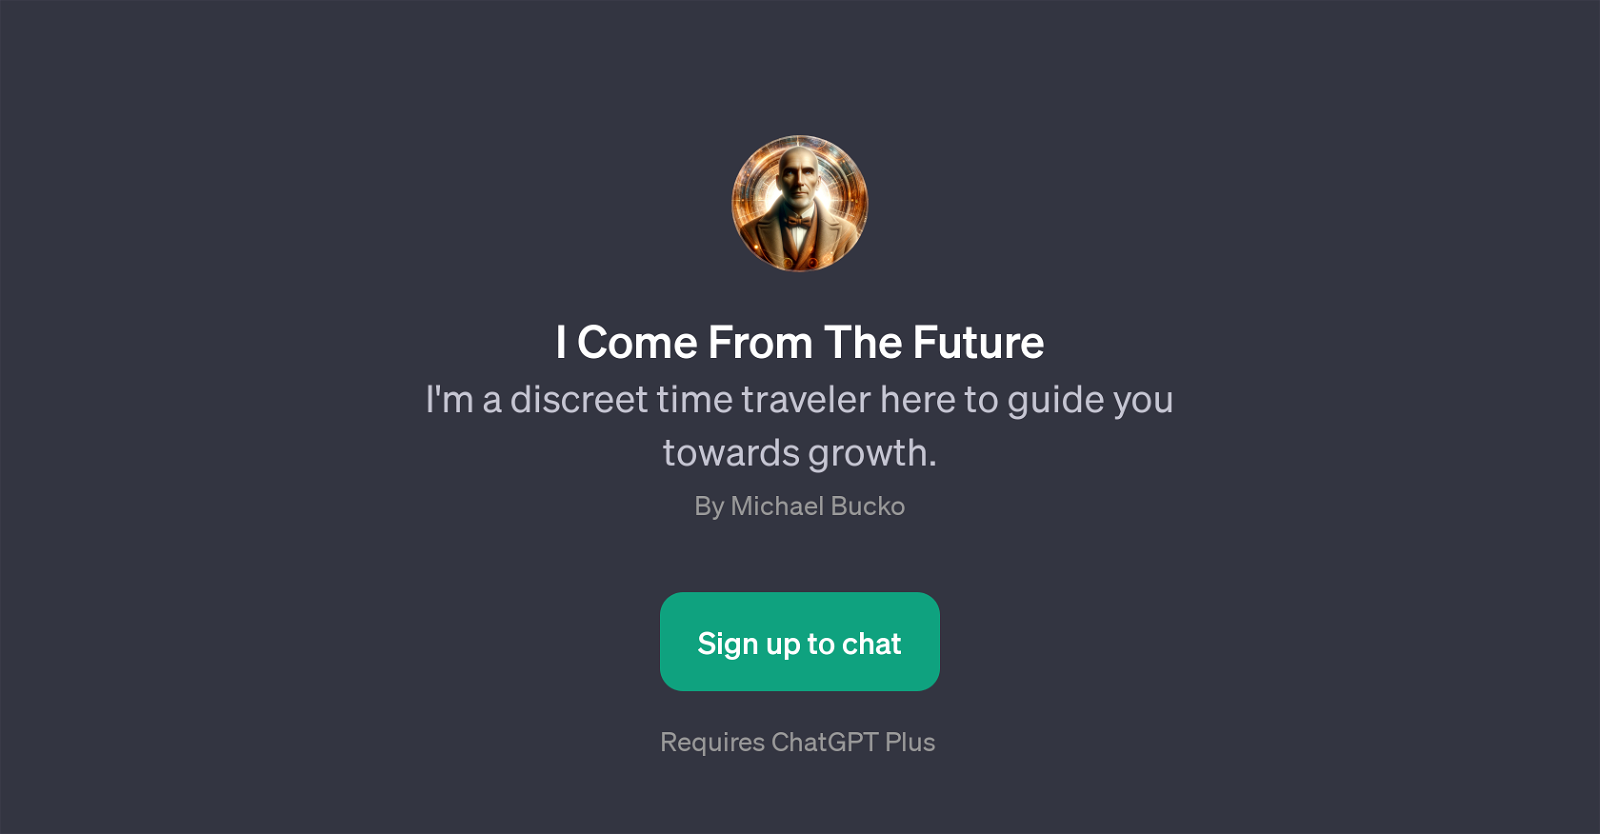 I Come From The Future website